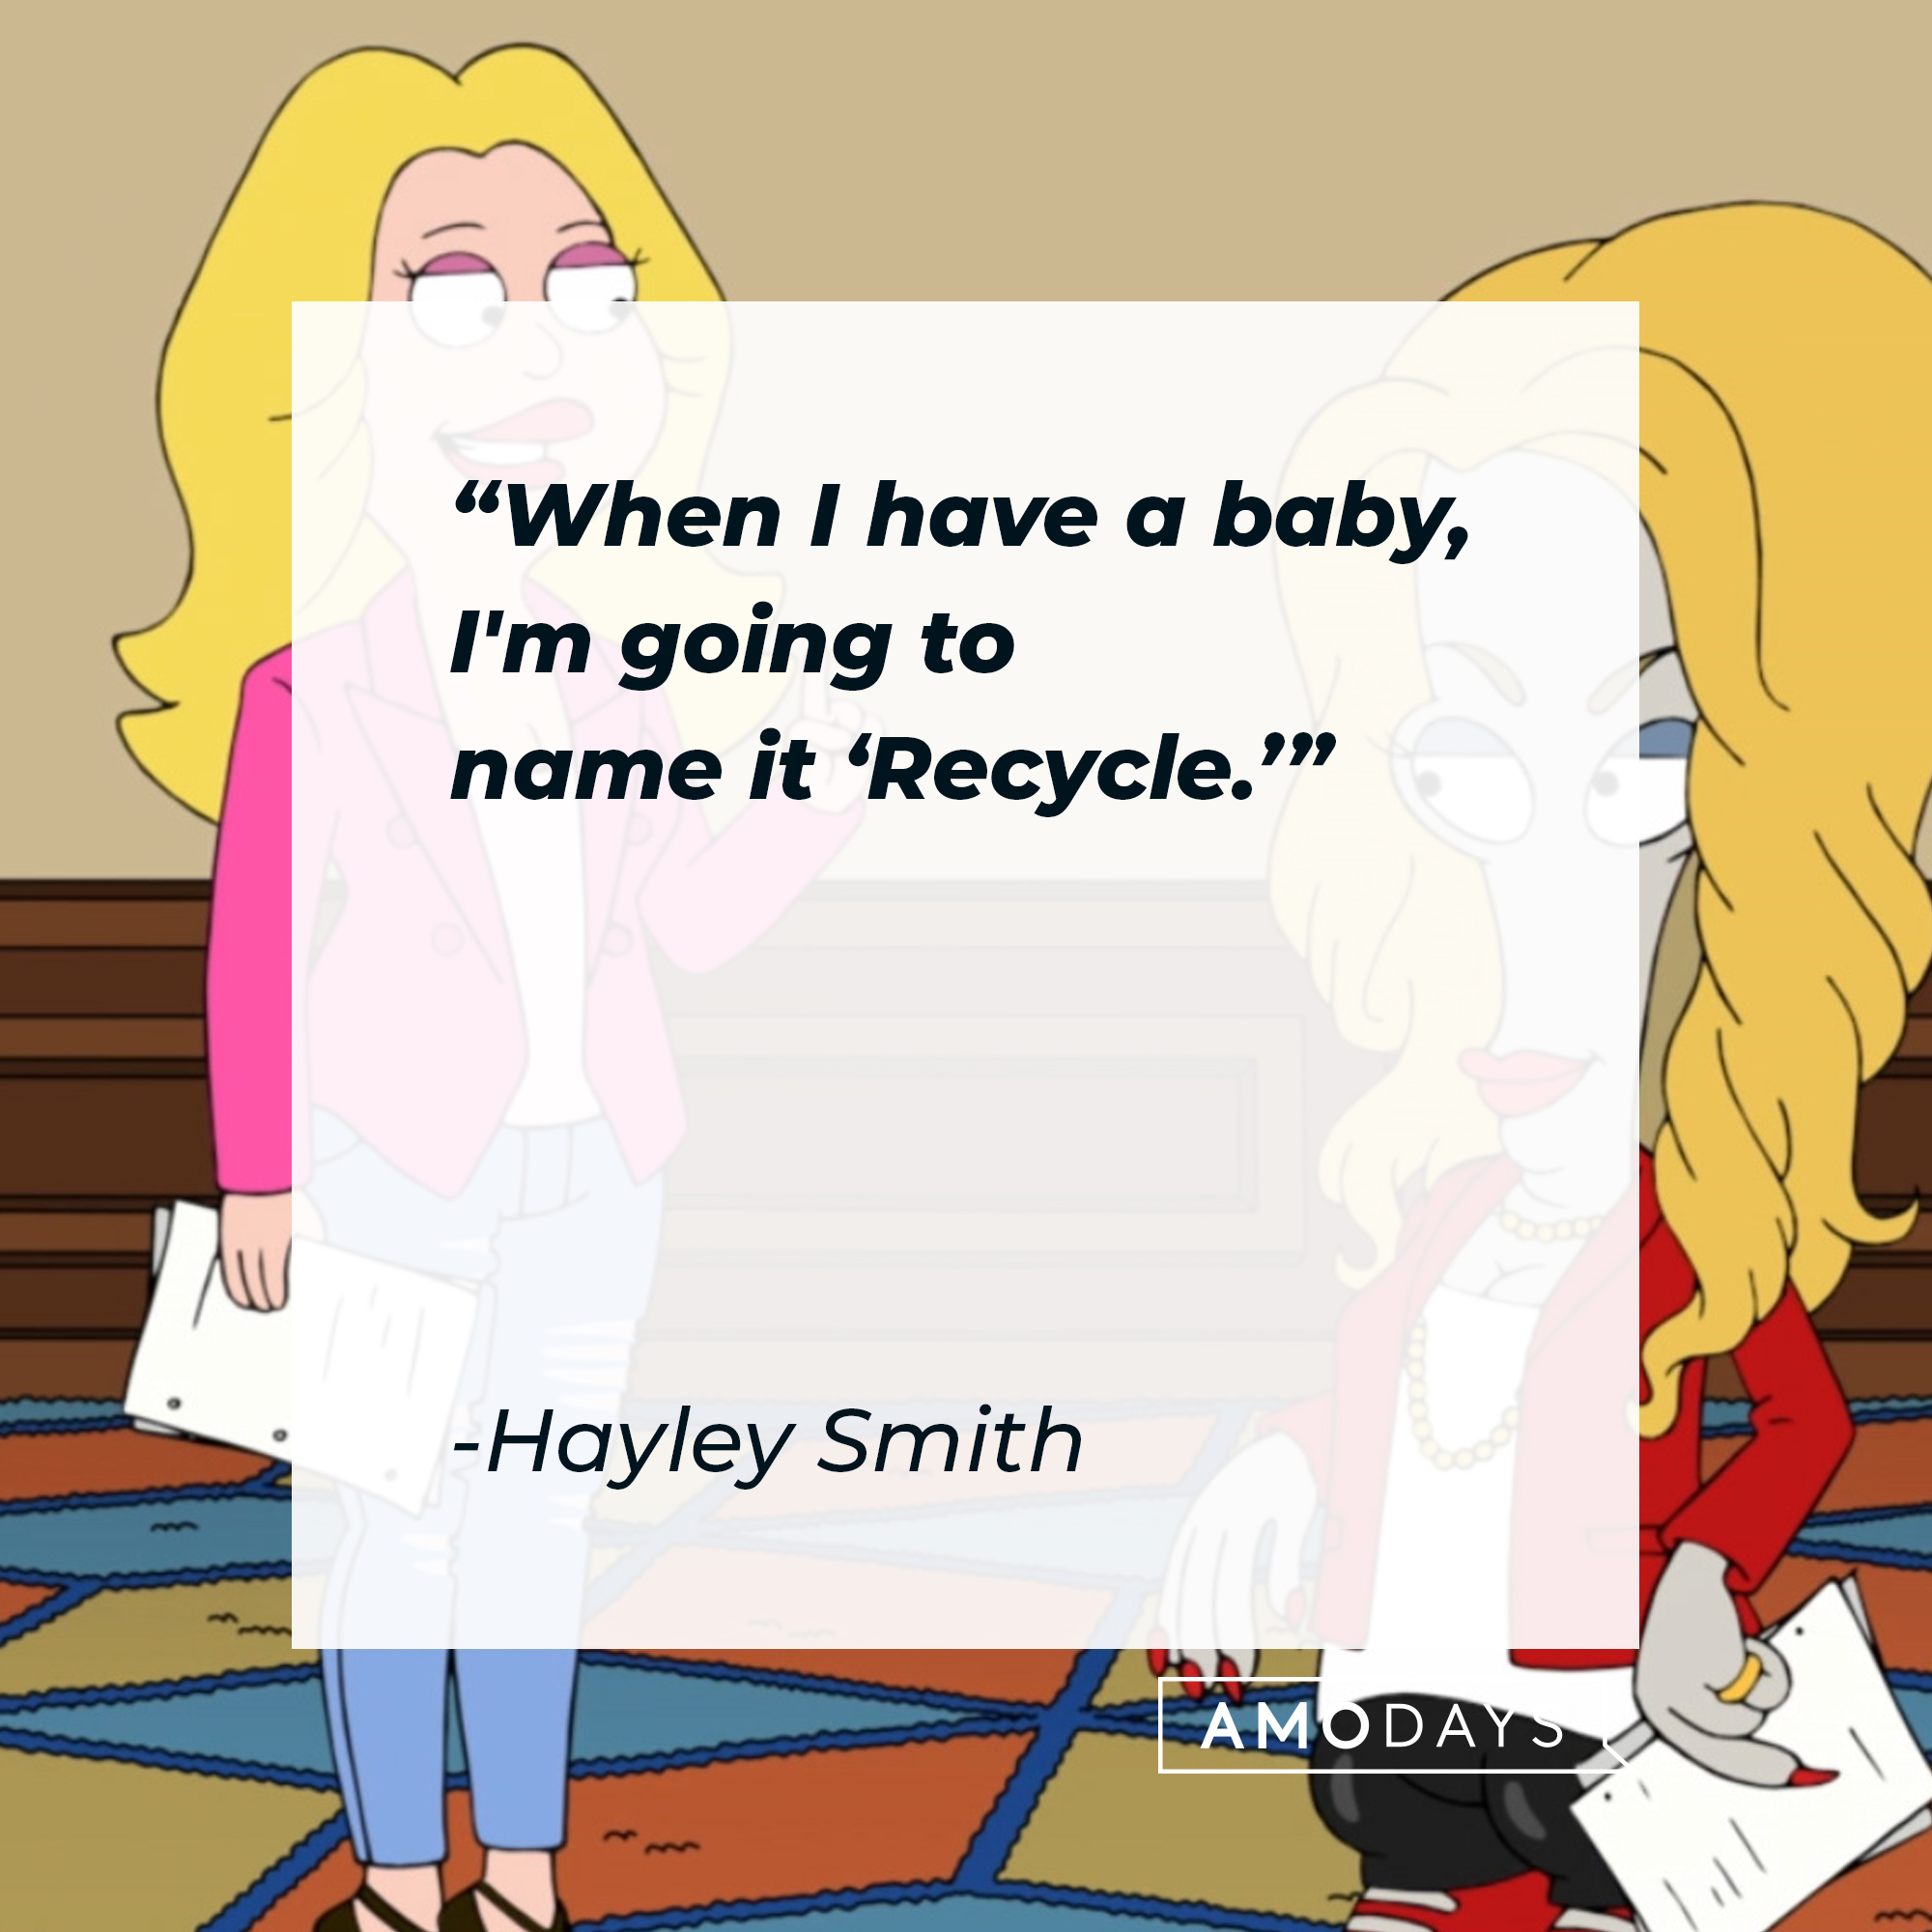 Hayley Smith's quote: "When I have a baby, I'm going to name it 'Recycle.'" | Source: facebook.com/AmericanDad